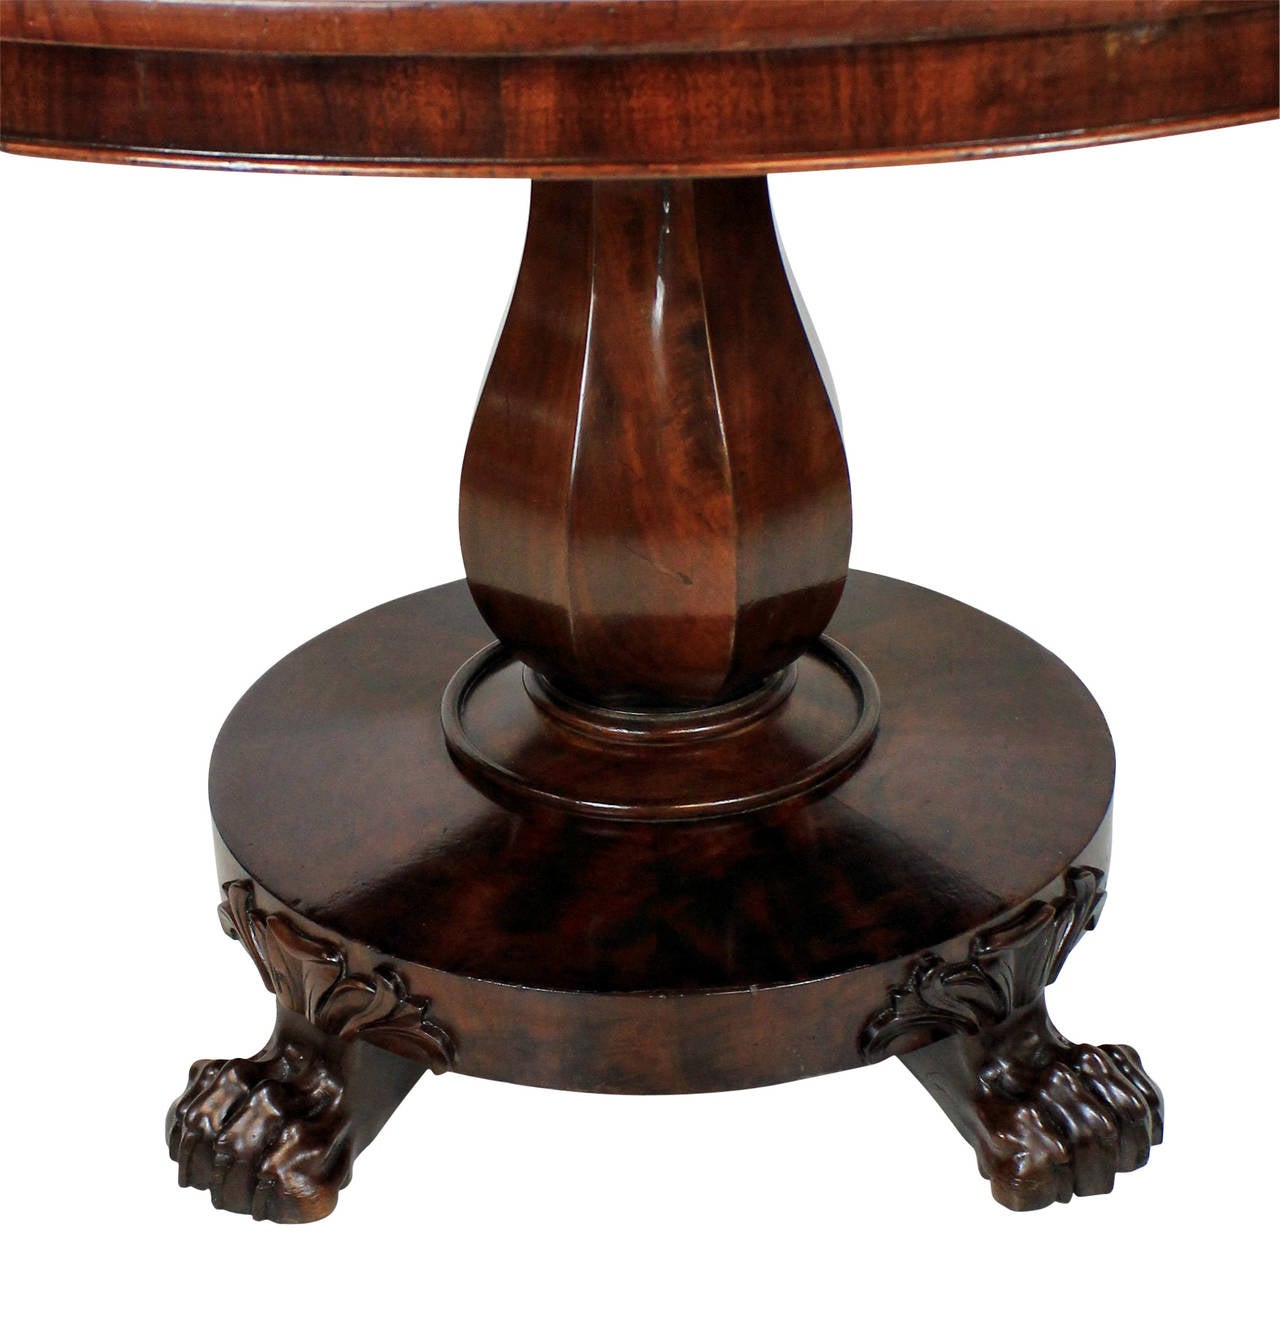 An Irish William IV mahogany centre table, with a baluster central stem and attractive claw feet. It has its original sunken casters.